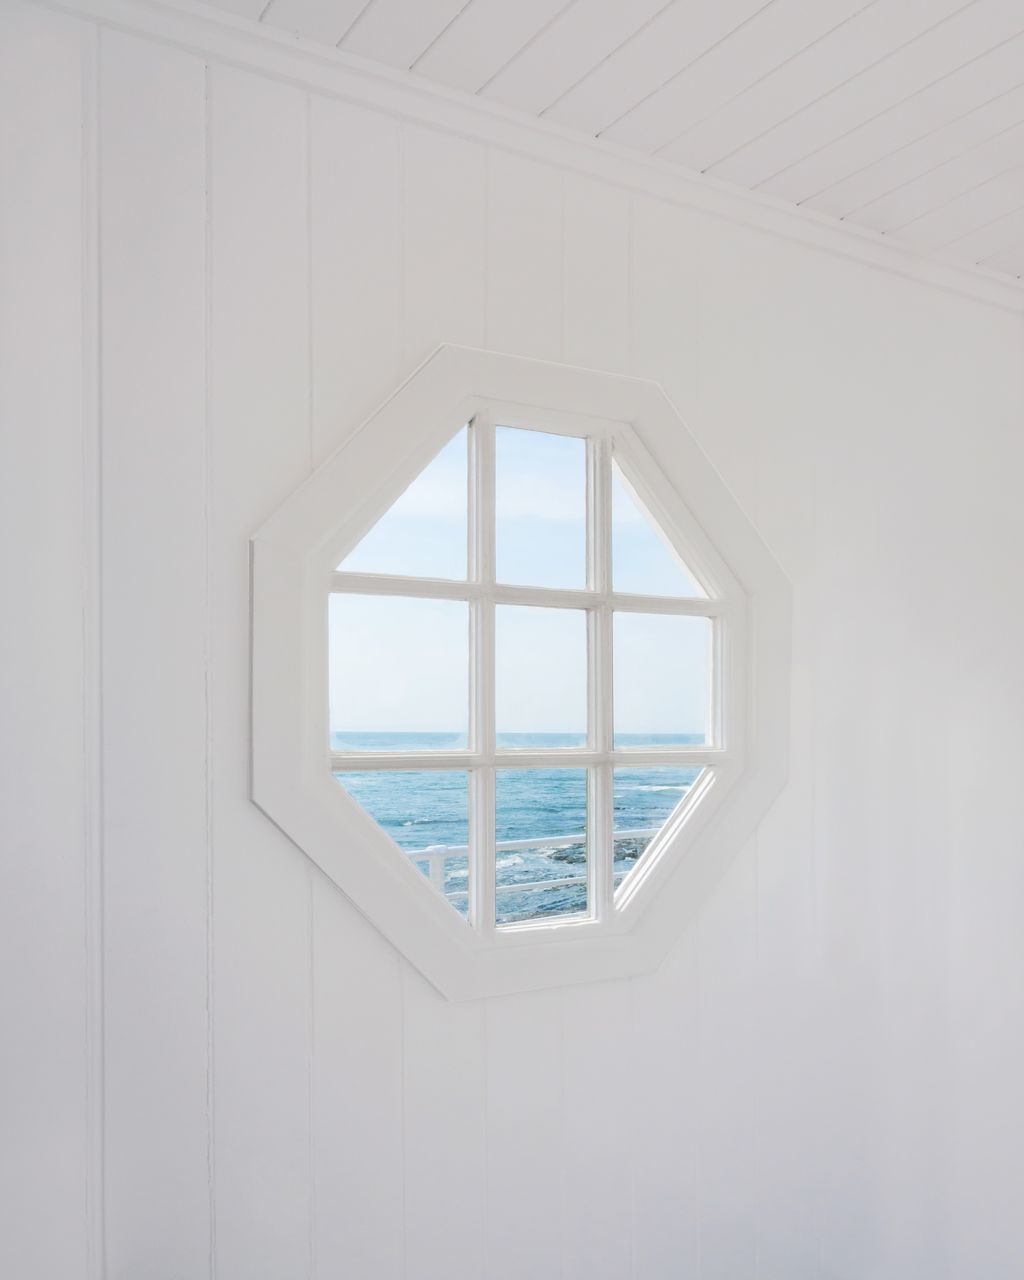 window, day, sea, architecture, glass - material, water, no people, nature, transparent, indoors, sky, built structure, white color, design, geometric shape, pattern, shape, horizon over water, window frame, ceiling